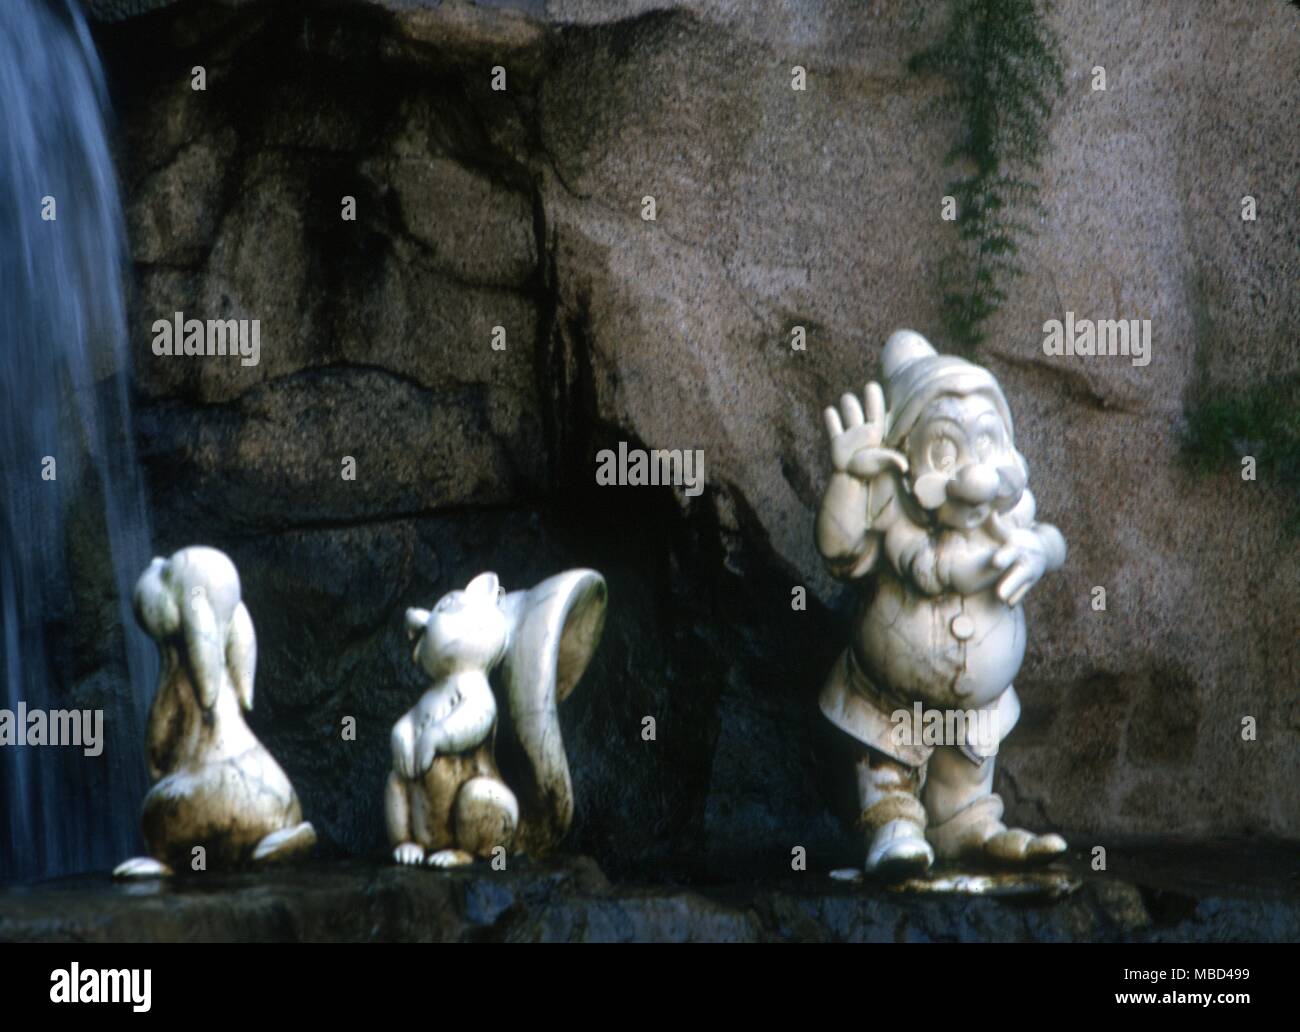 Elementals - Gnomes - The gnomes (dwarfs) of the story Snow White and the Seven Dwarfs near the wishing well in Disneyworld, California. - ©Charles Walker / Stock Photo